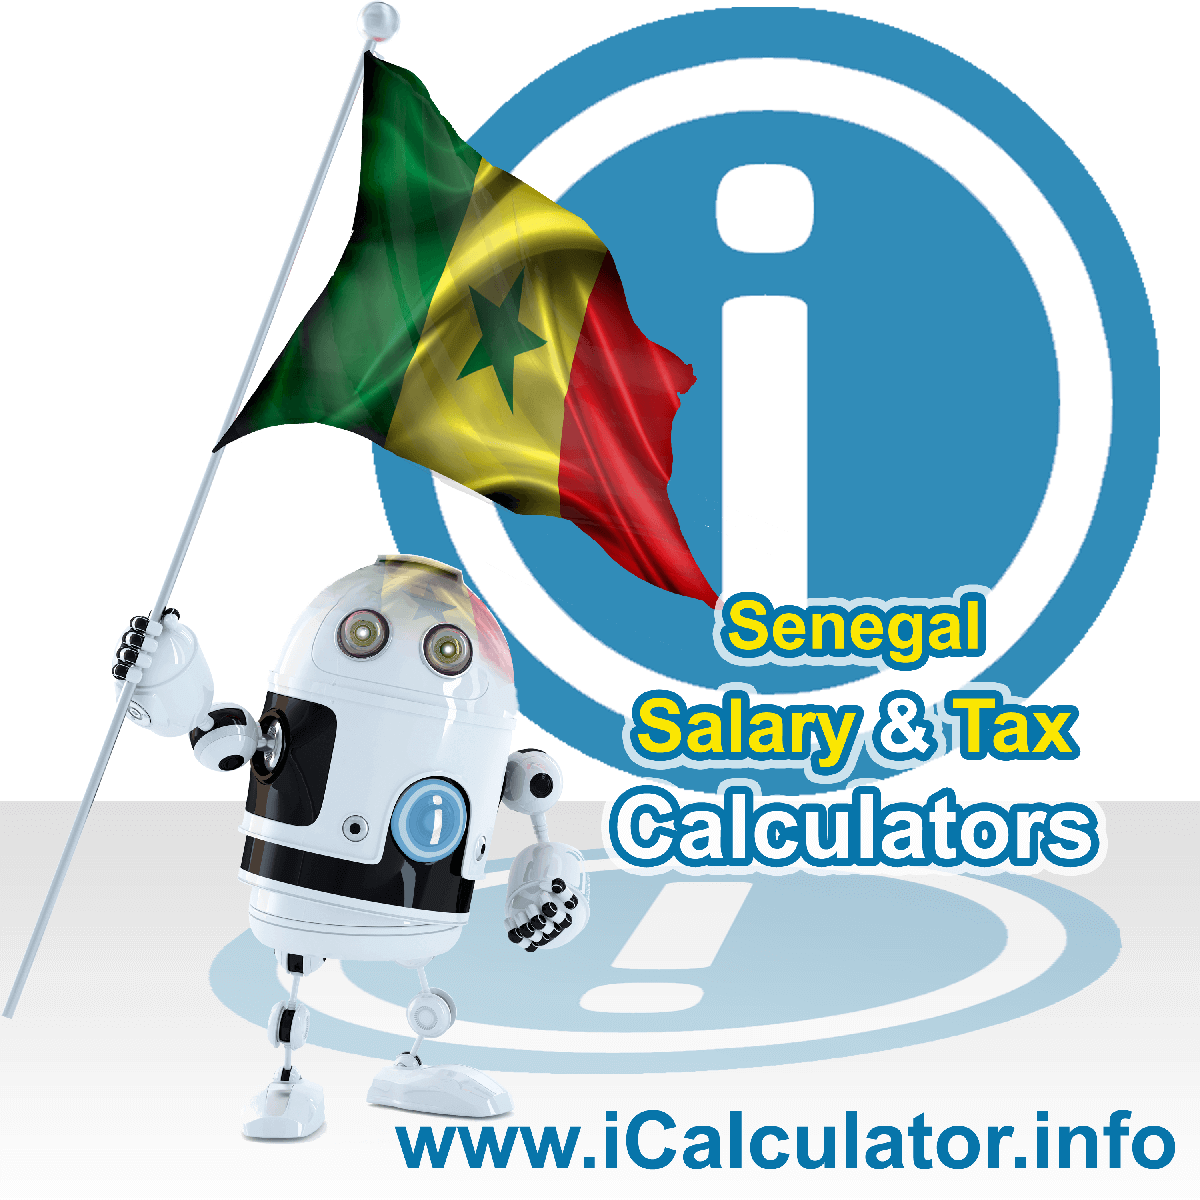 Senegal Wage Calculator. This image shows the Senegal flag and information relating to the tax formula for the Senegal Tax Calculator